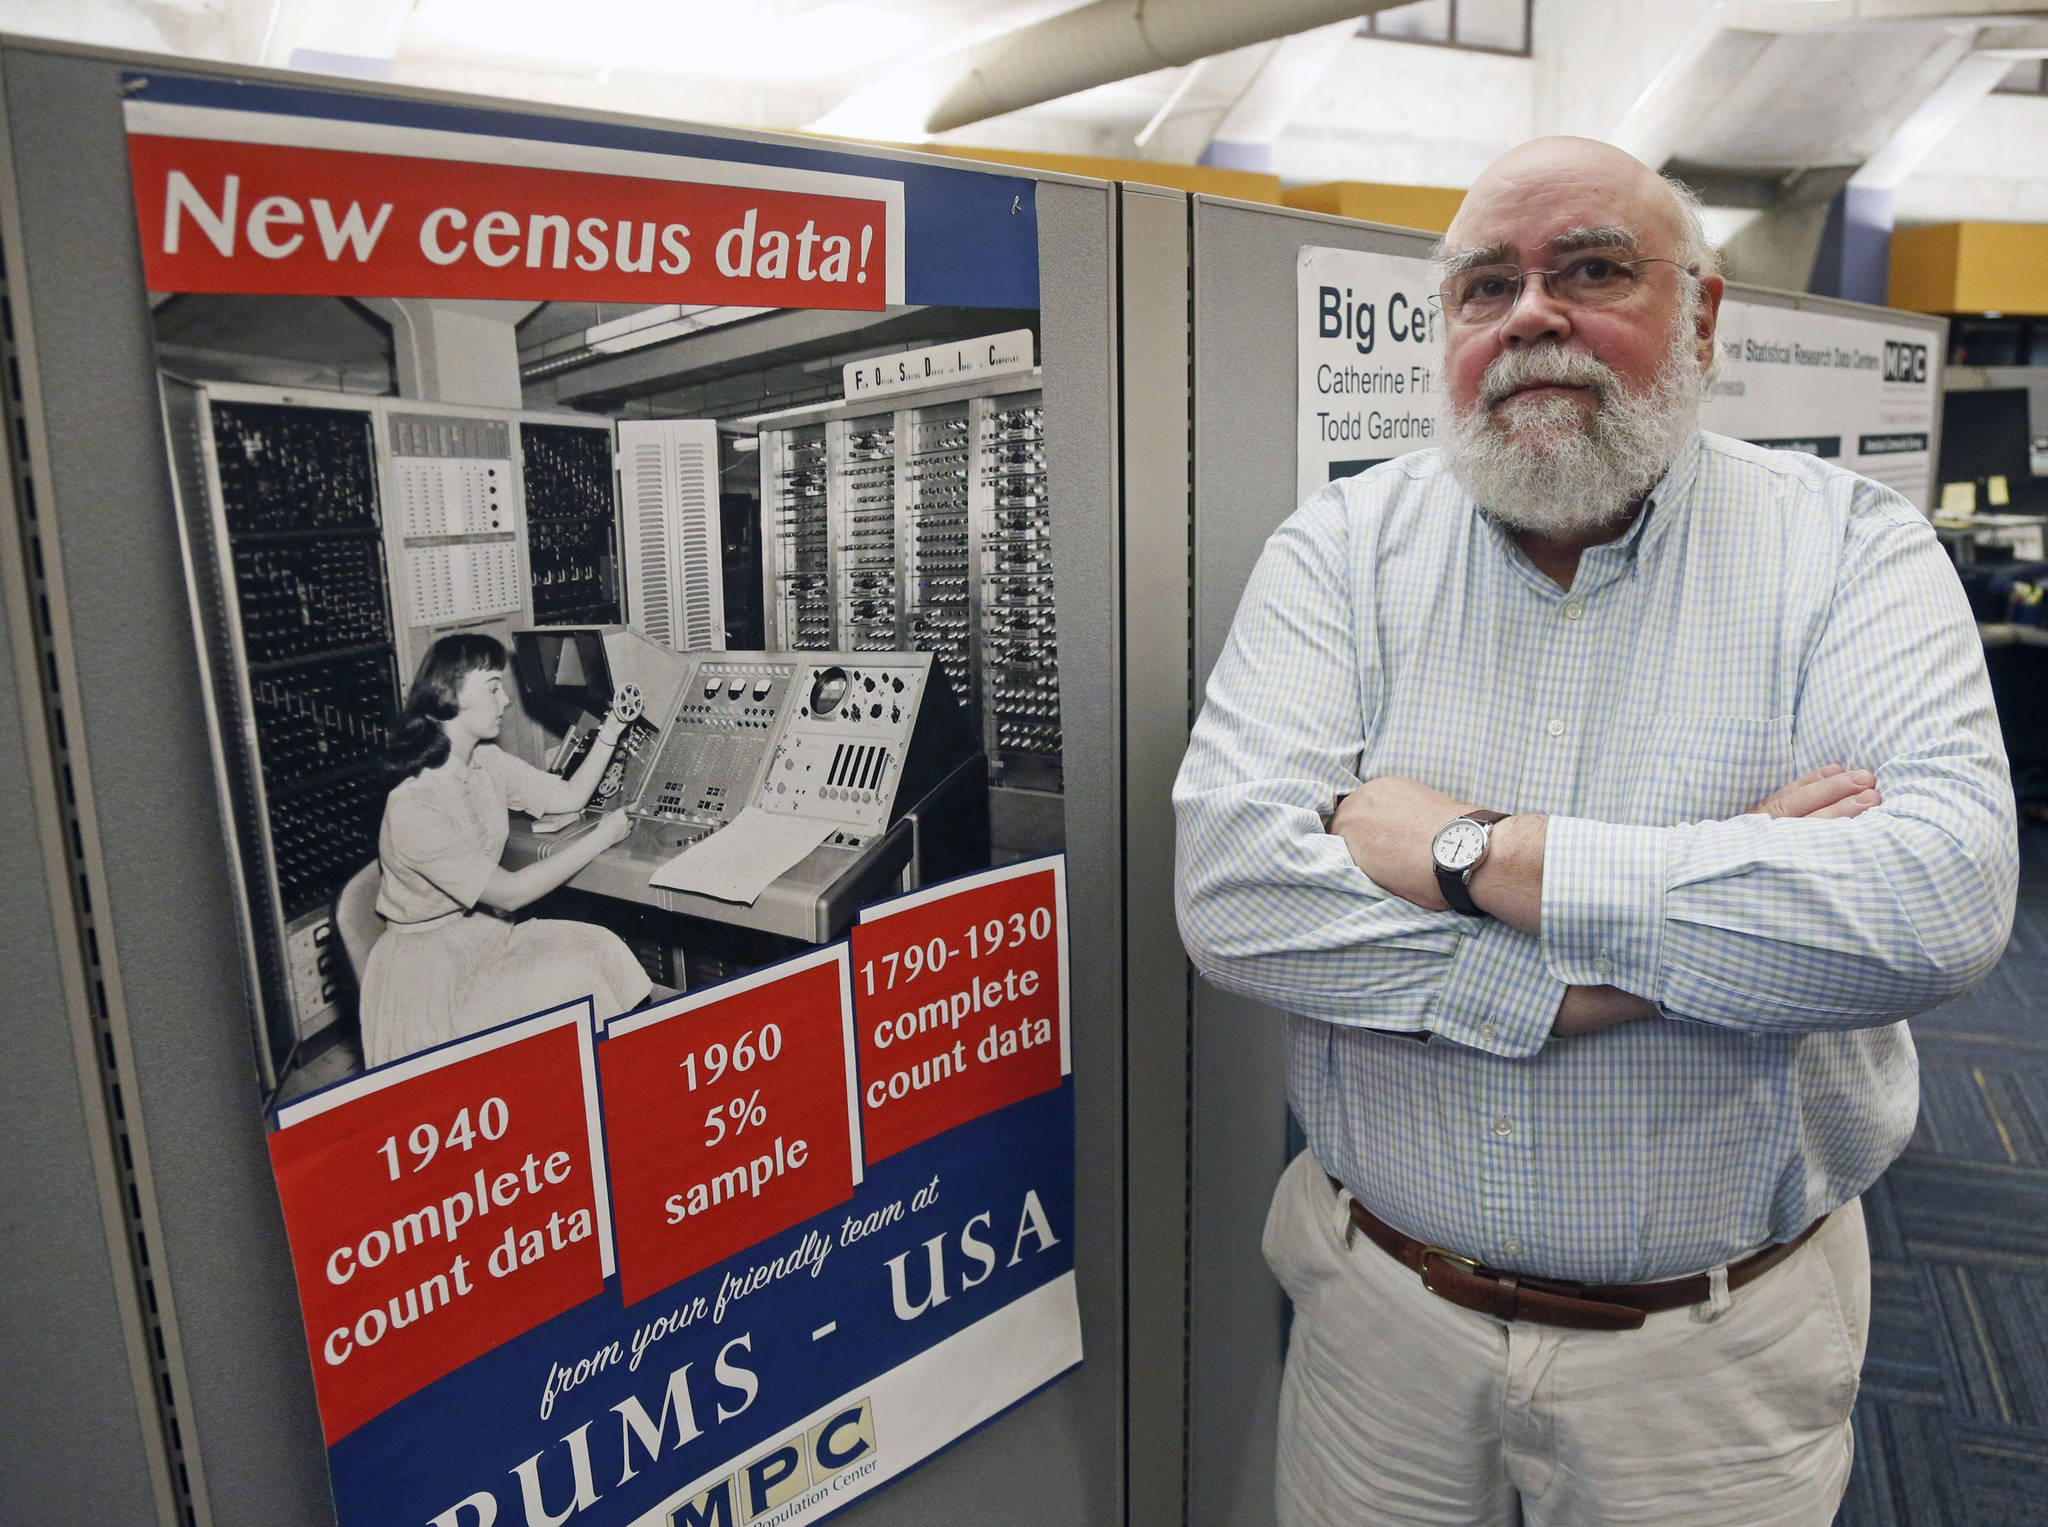 Steven Ruggles, director of the Institute for Social Research and Data Innovation at the University of Minnesota, poses in Minneapolis In this September 2019 photo. States around the country, including Alaska, are readying for the 2020 census. (AP Photo | Jim Mone)